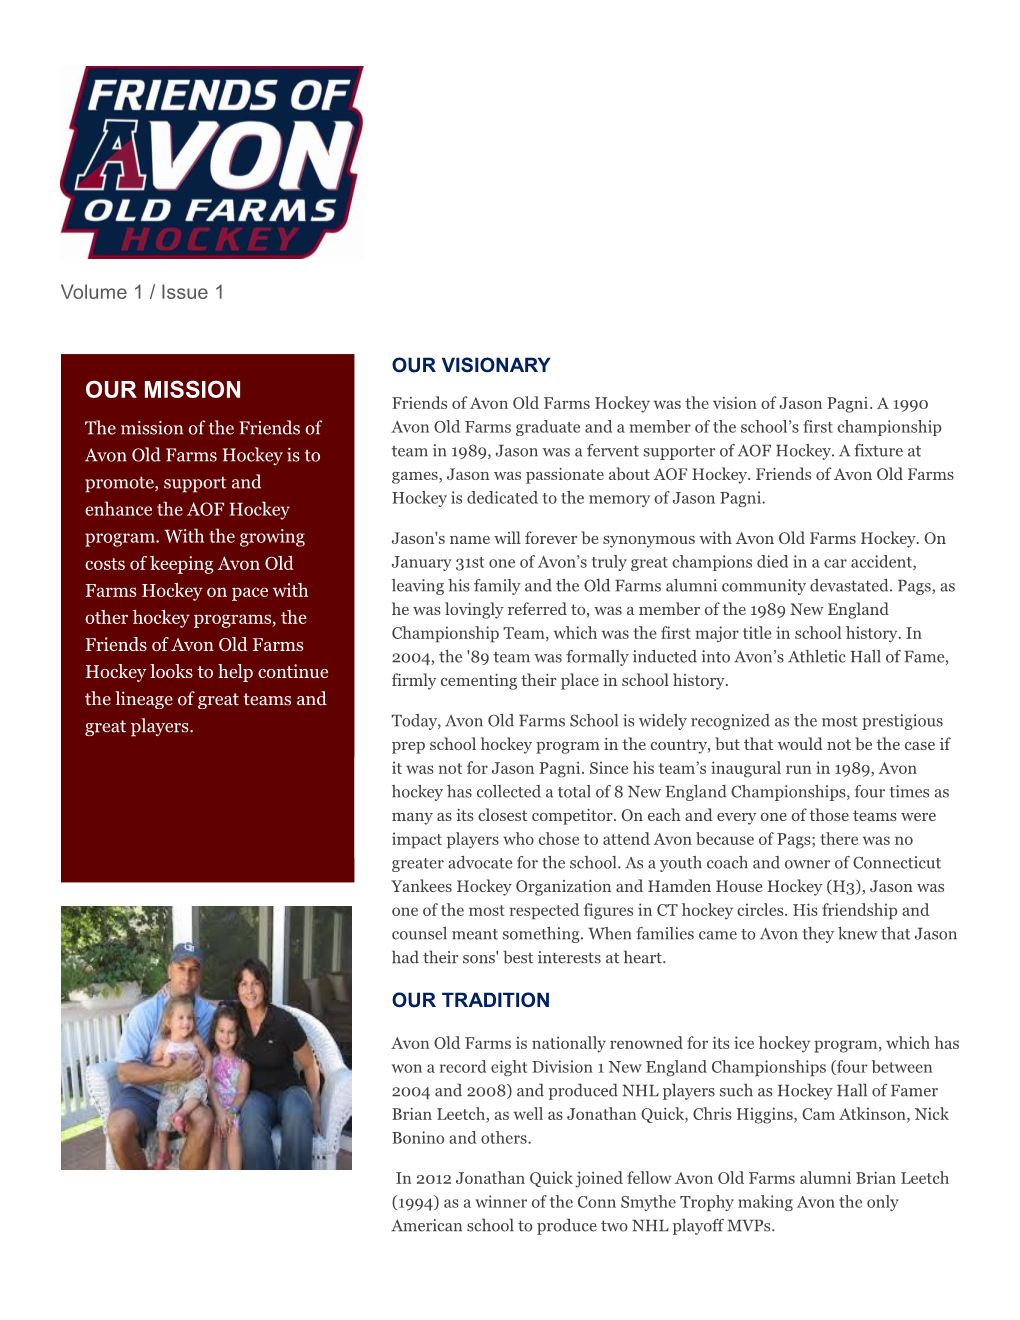 OUR MISSION Friends of Avon Old Farms Hockey Was the Vision of Jason Pagni